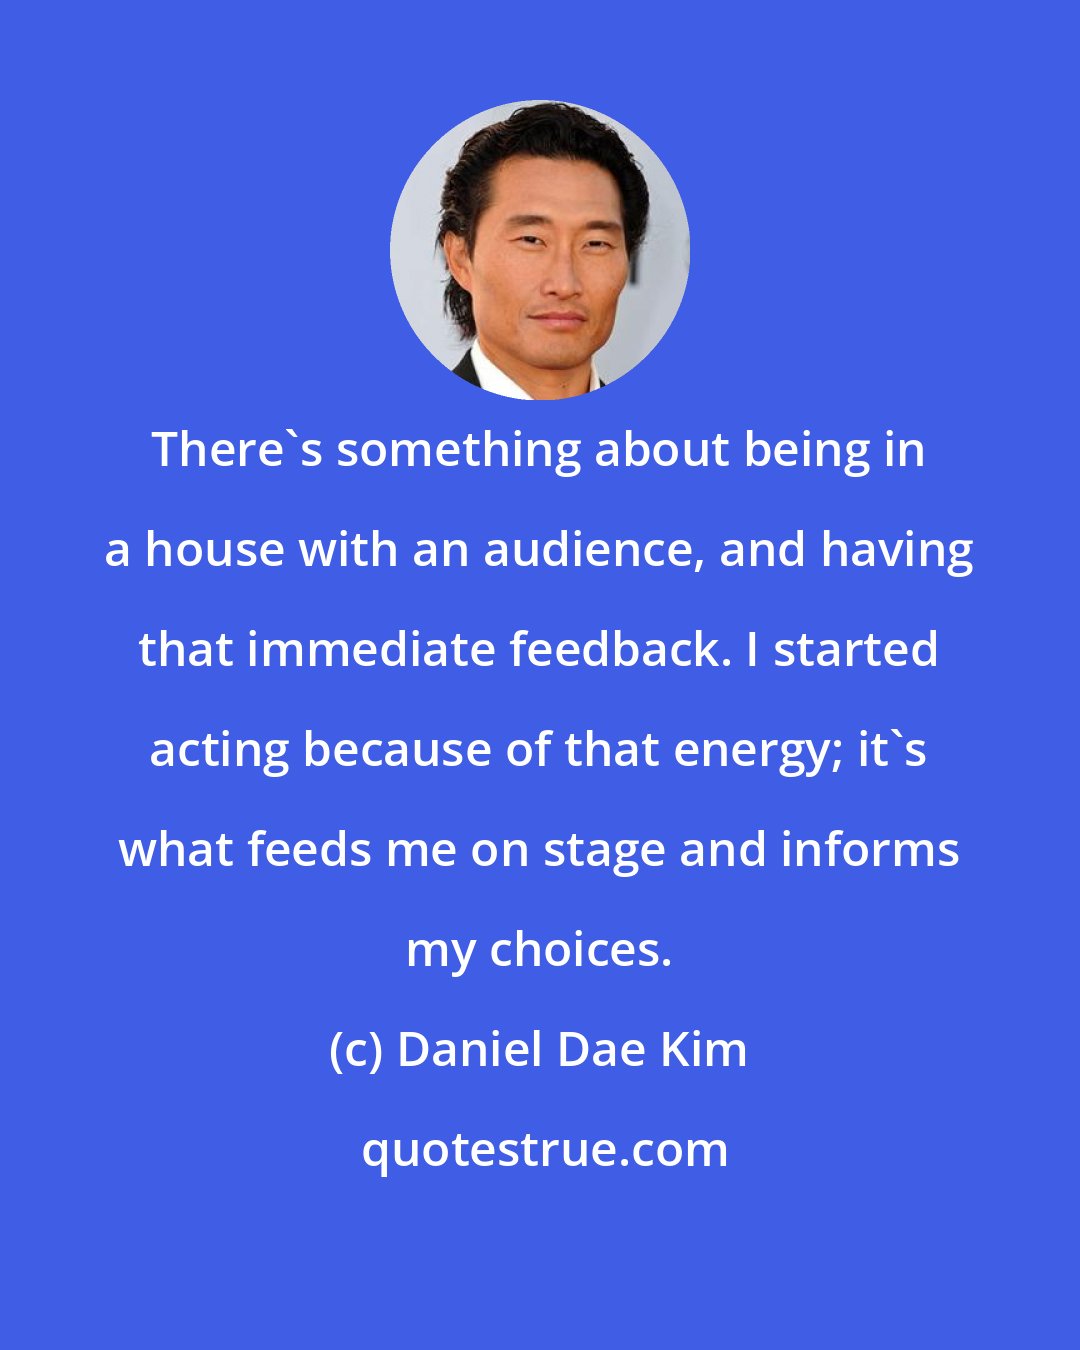 Daniel Dae Kim: There's something about being in a house with an audience, and having that immediate feedback. I started acting because of that energy; it's what feeds me on stage and informs my choices.